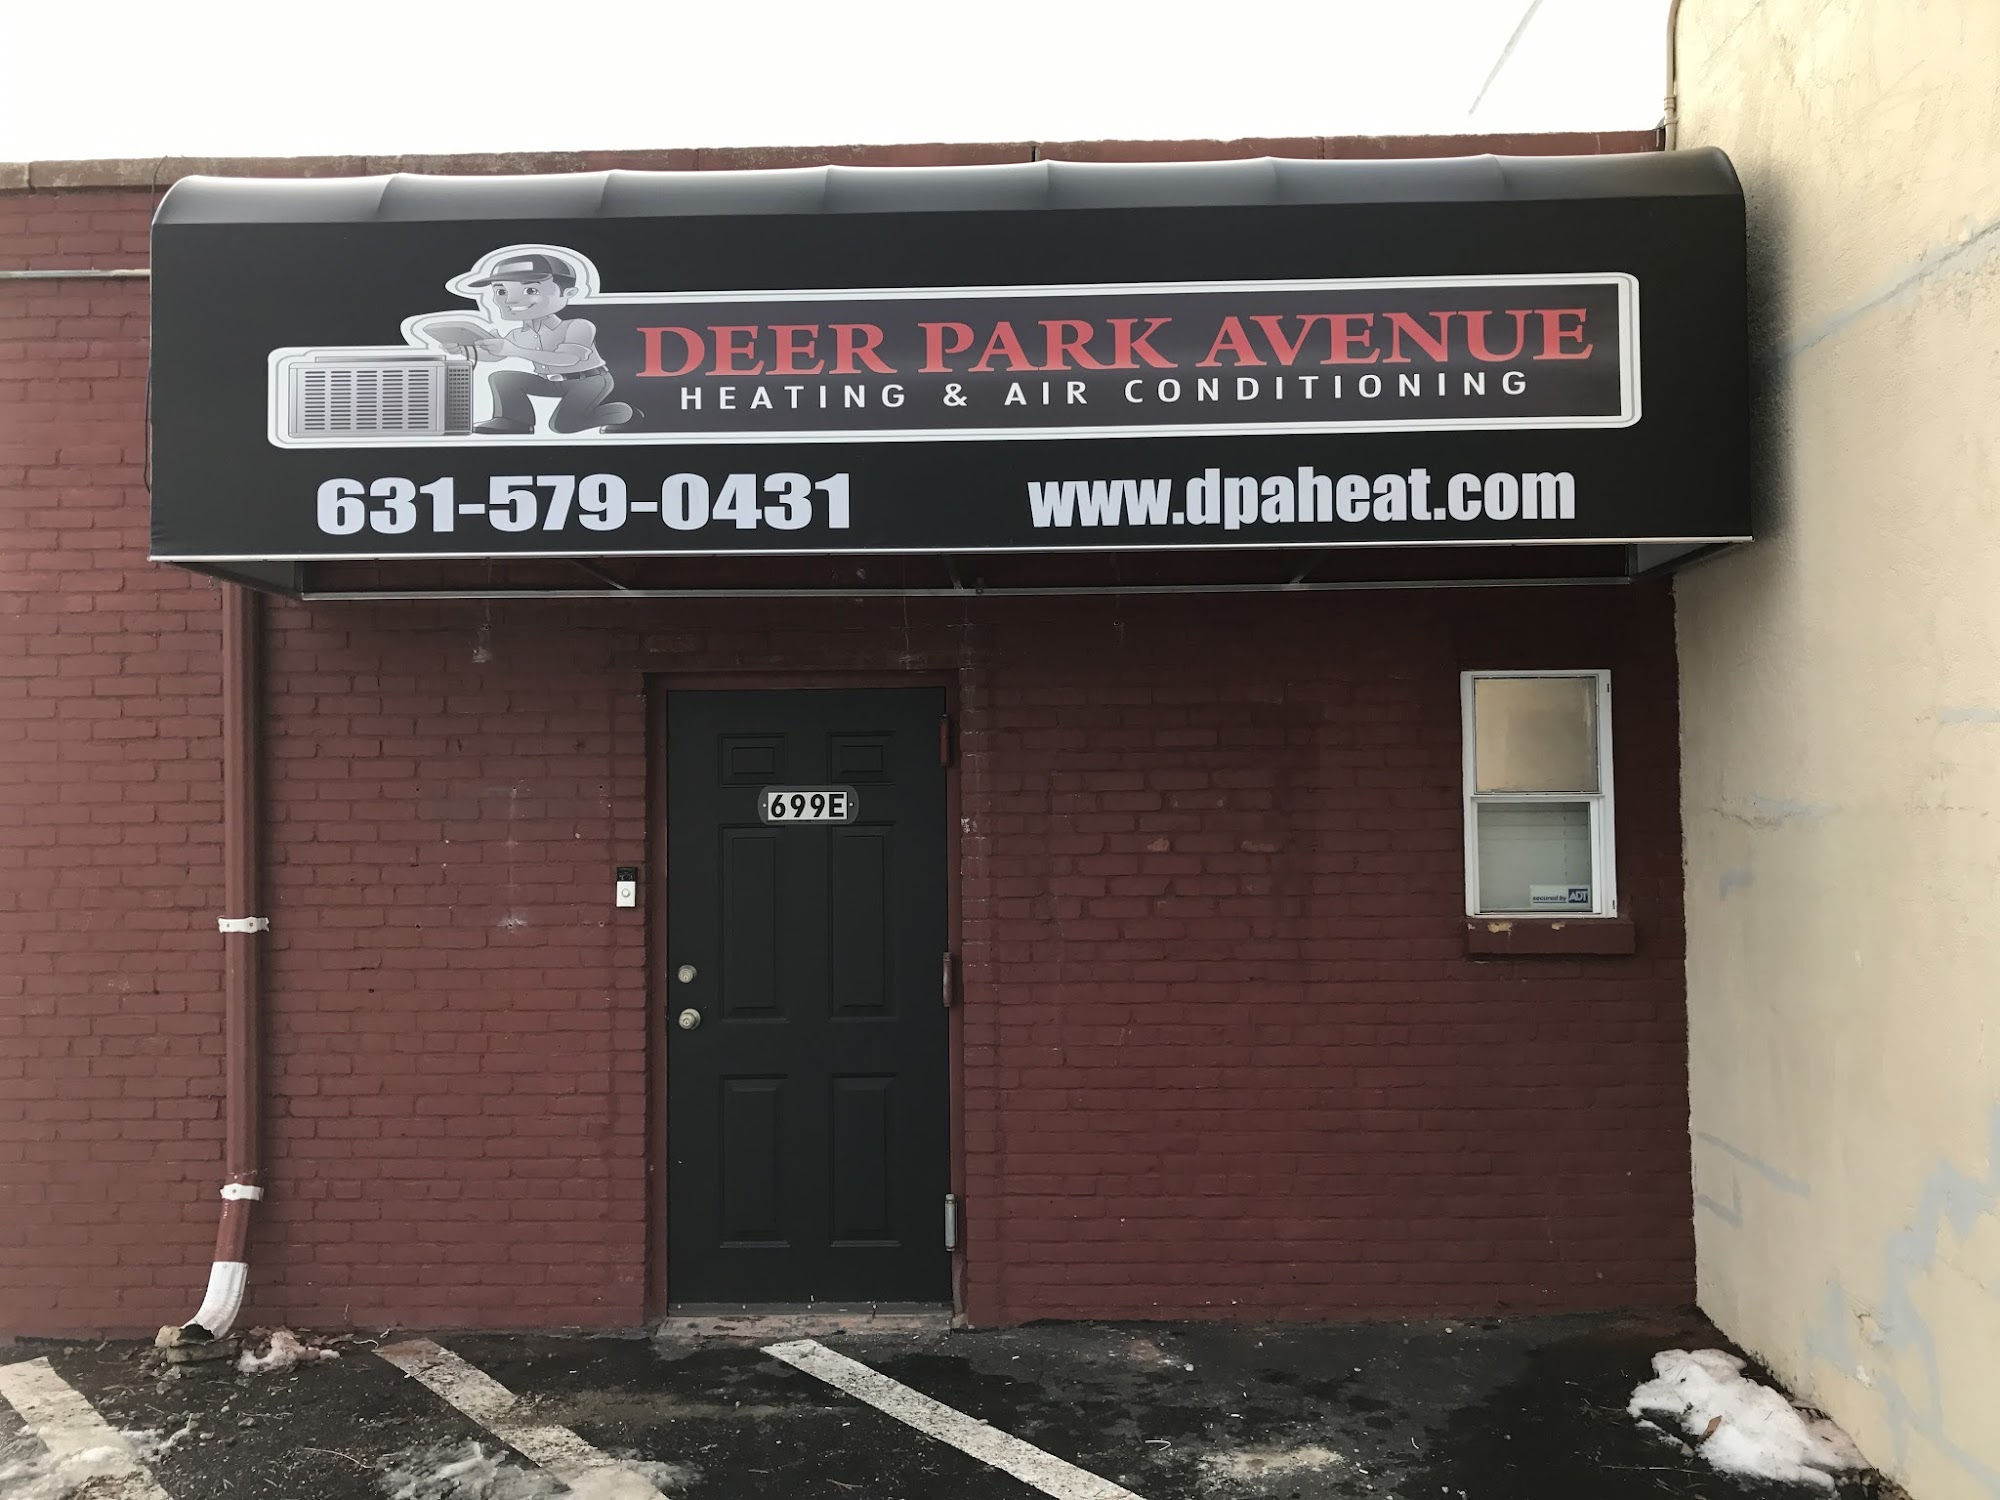 Deer Park Ave Heating & Air Conditioning Corporation